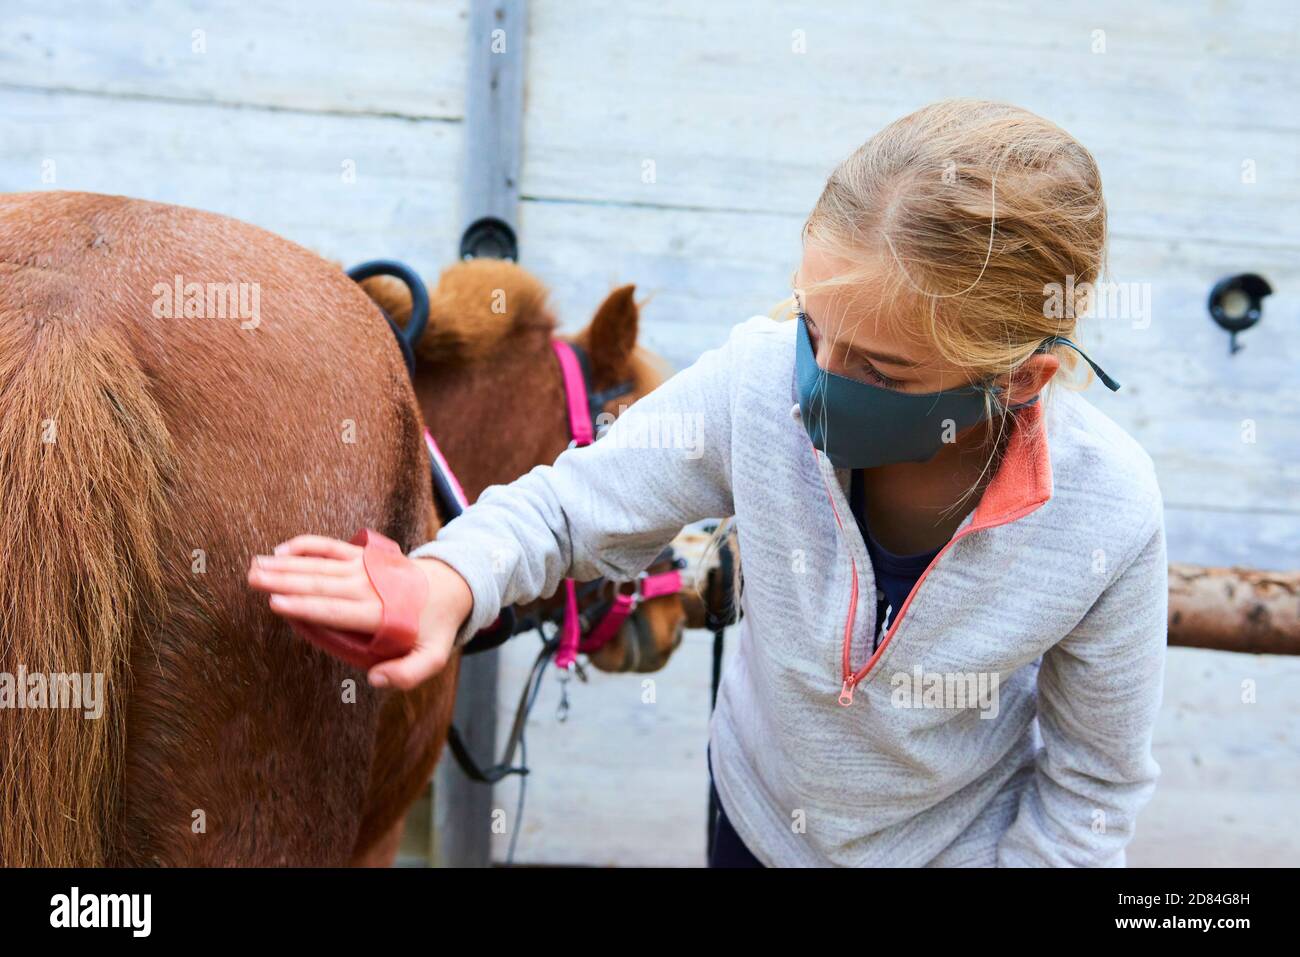 Child grooming horse with brush, Girl cleaning and taking care of horse Stock Photo